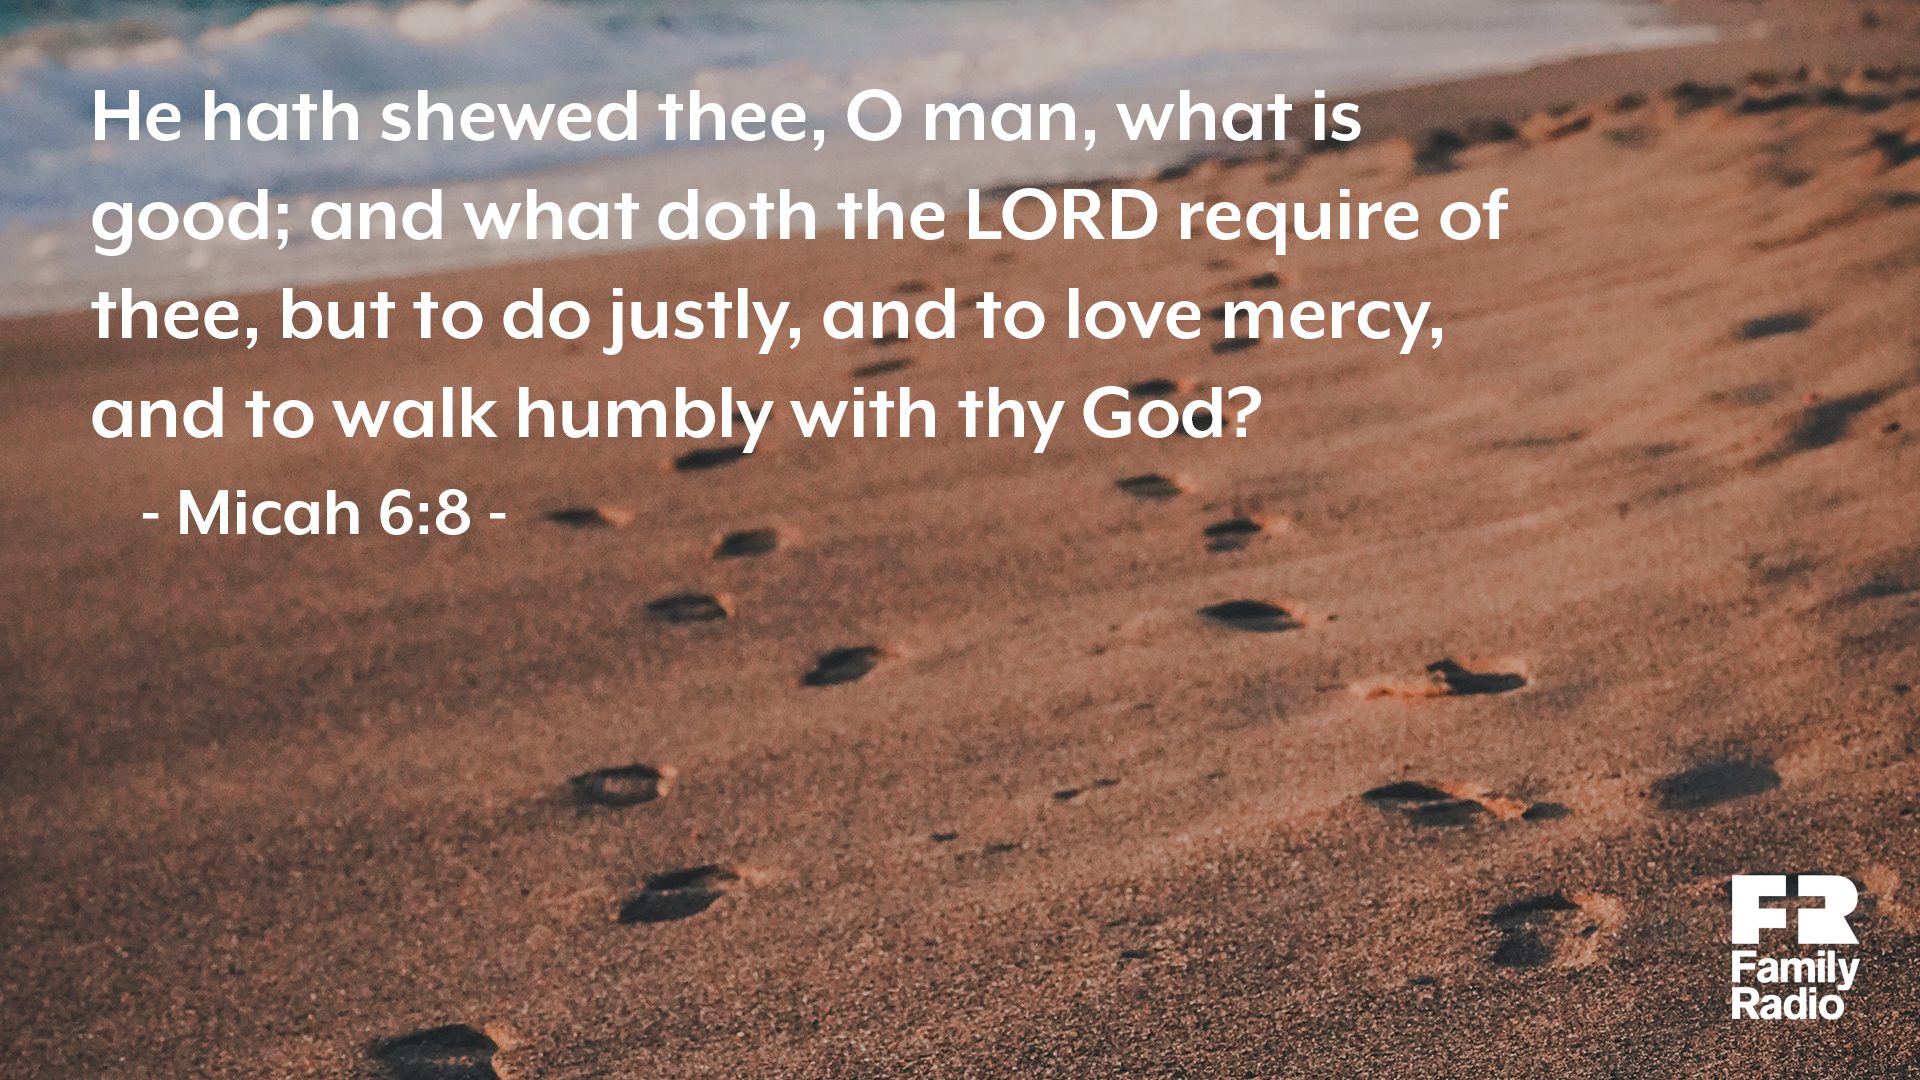 "He hath shewed thee, O man, what is good; and what doth the <span class="small-caps">Lord</span> require of thee, but to do justly, and to love mercy, and to walk humbly with thy God?"